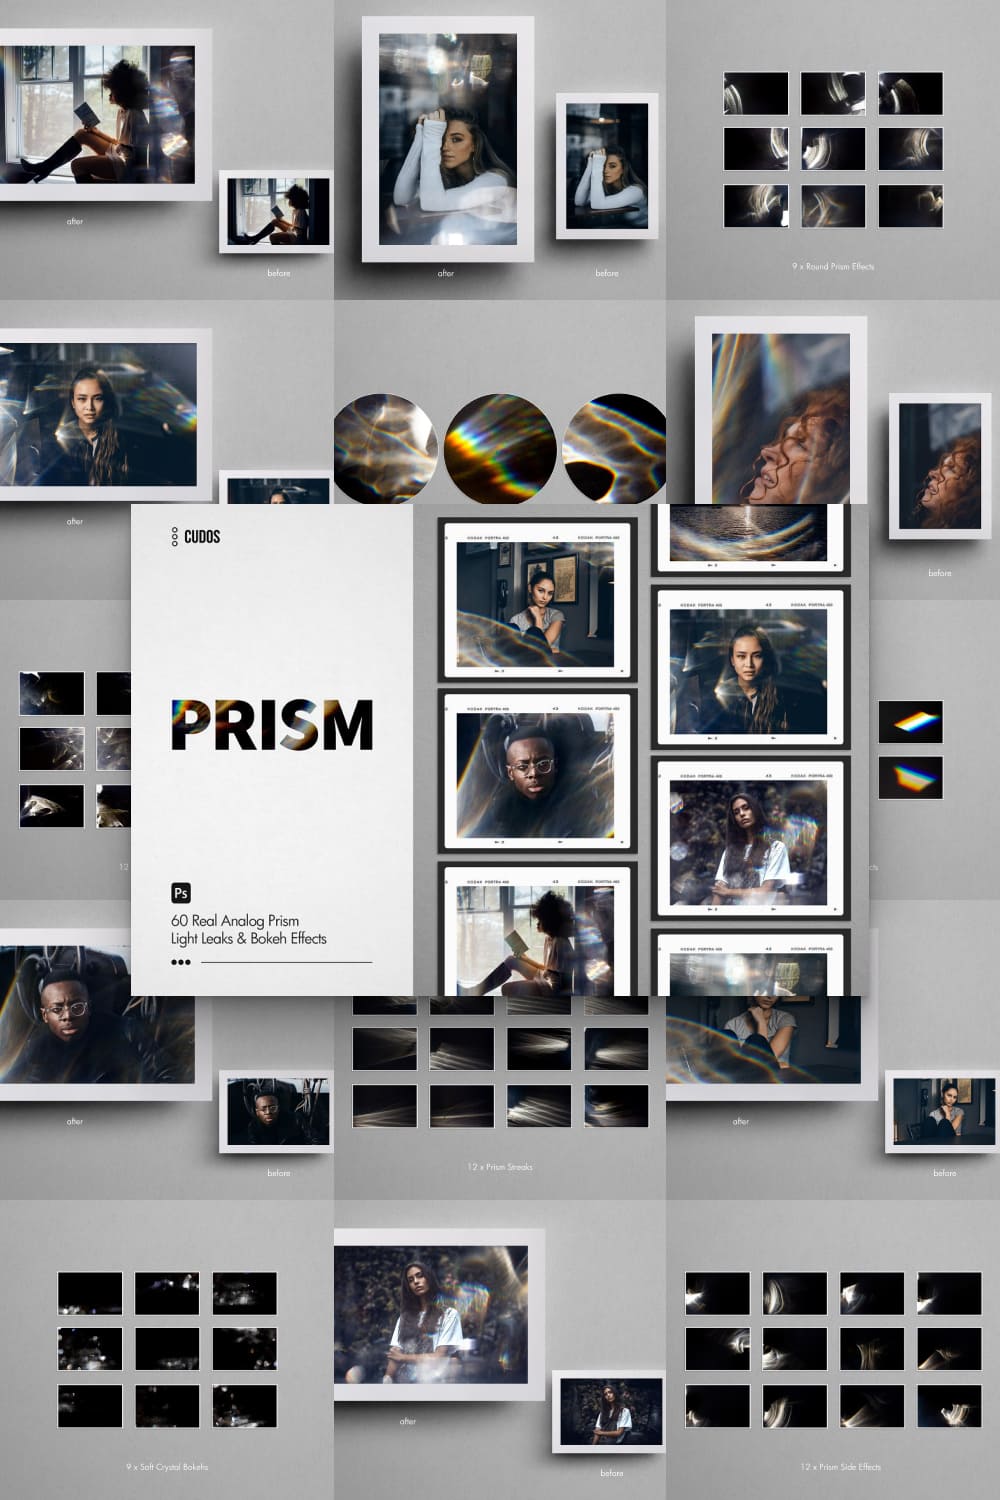 PRISM is a collection of 60 analog prism light leaks and effects.